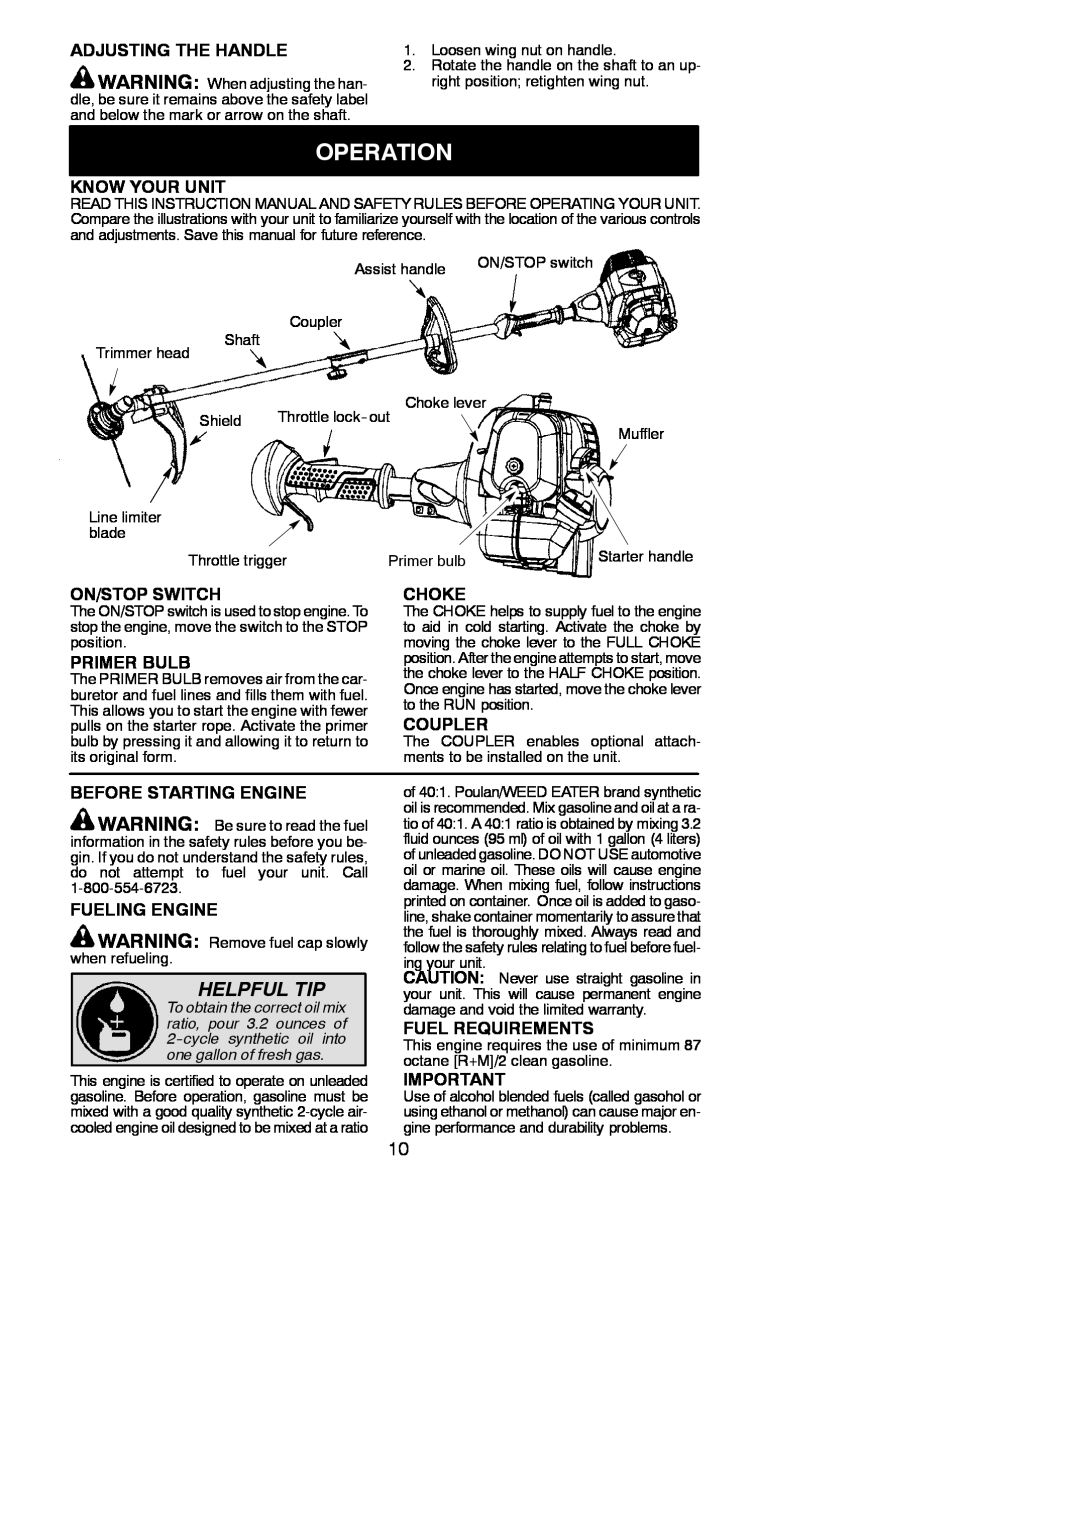 Poulan 966479401 Operation, Helpful Tip, Adjusting The Handle, Know Your Unit, On/Stop Switch, Choke, Primer Bulb, Coupler 